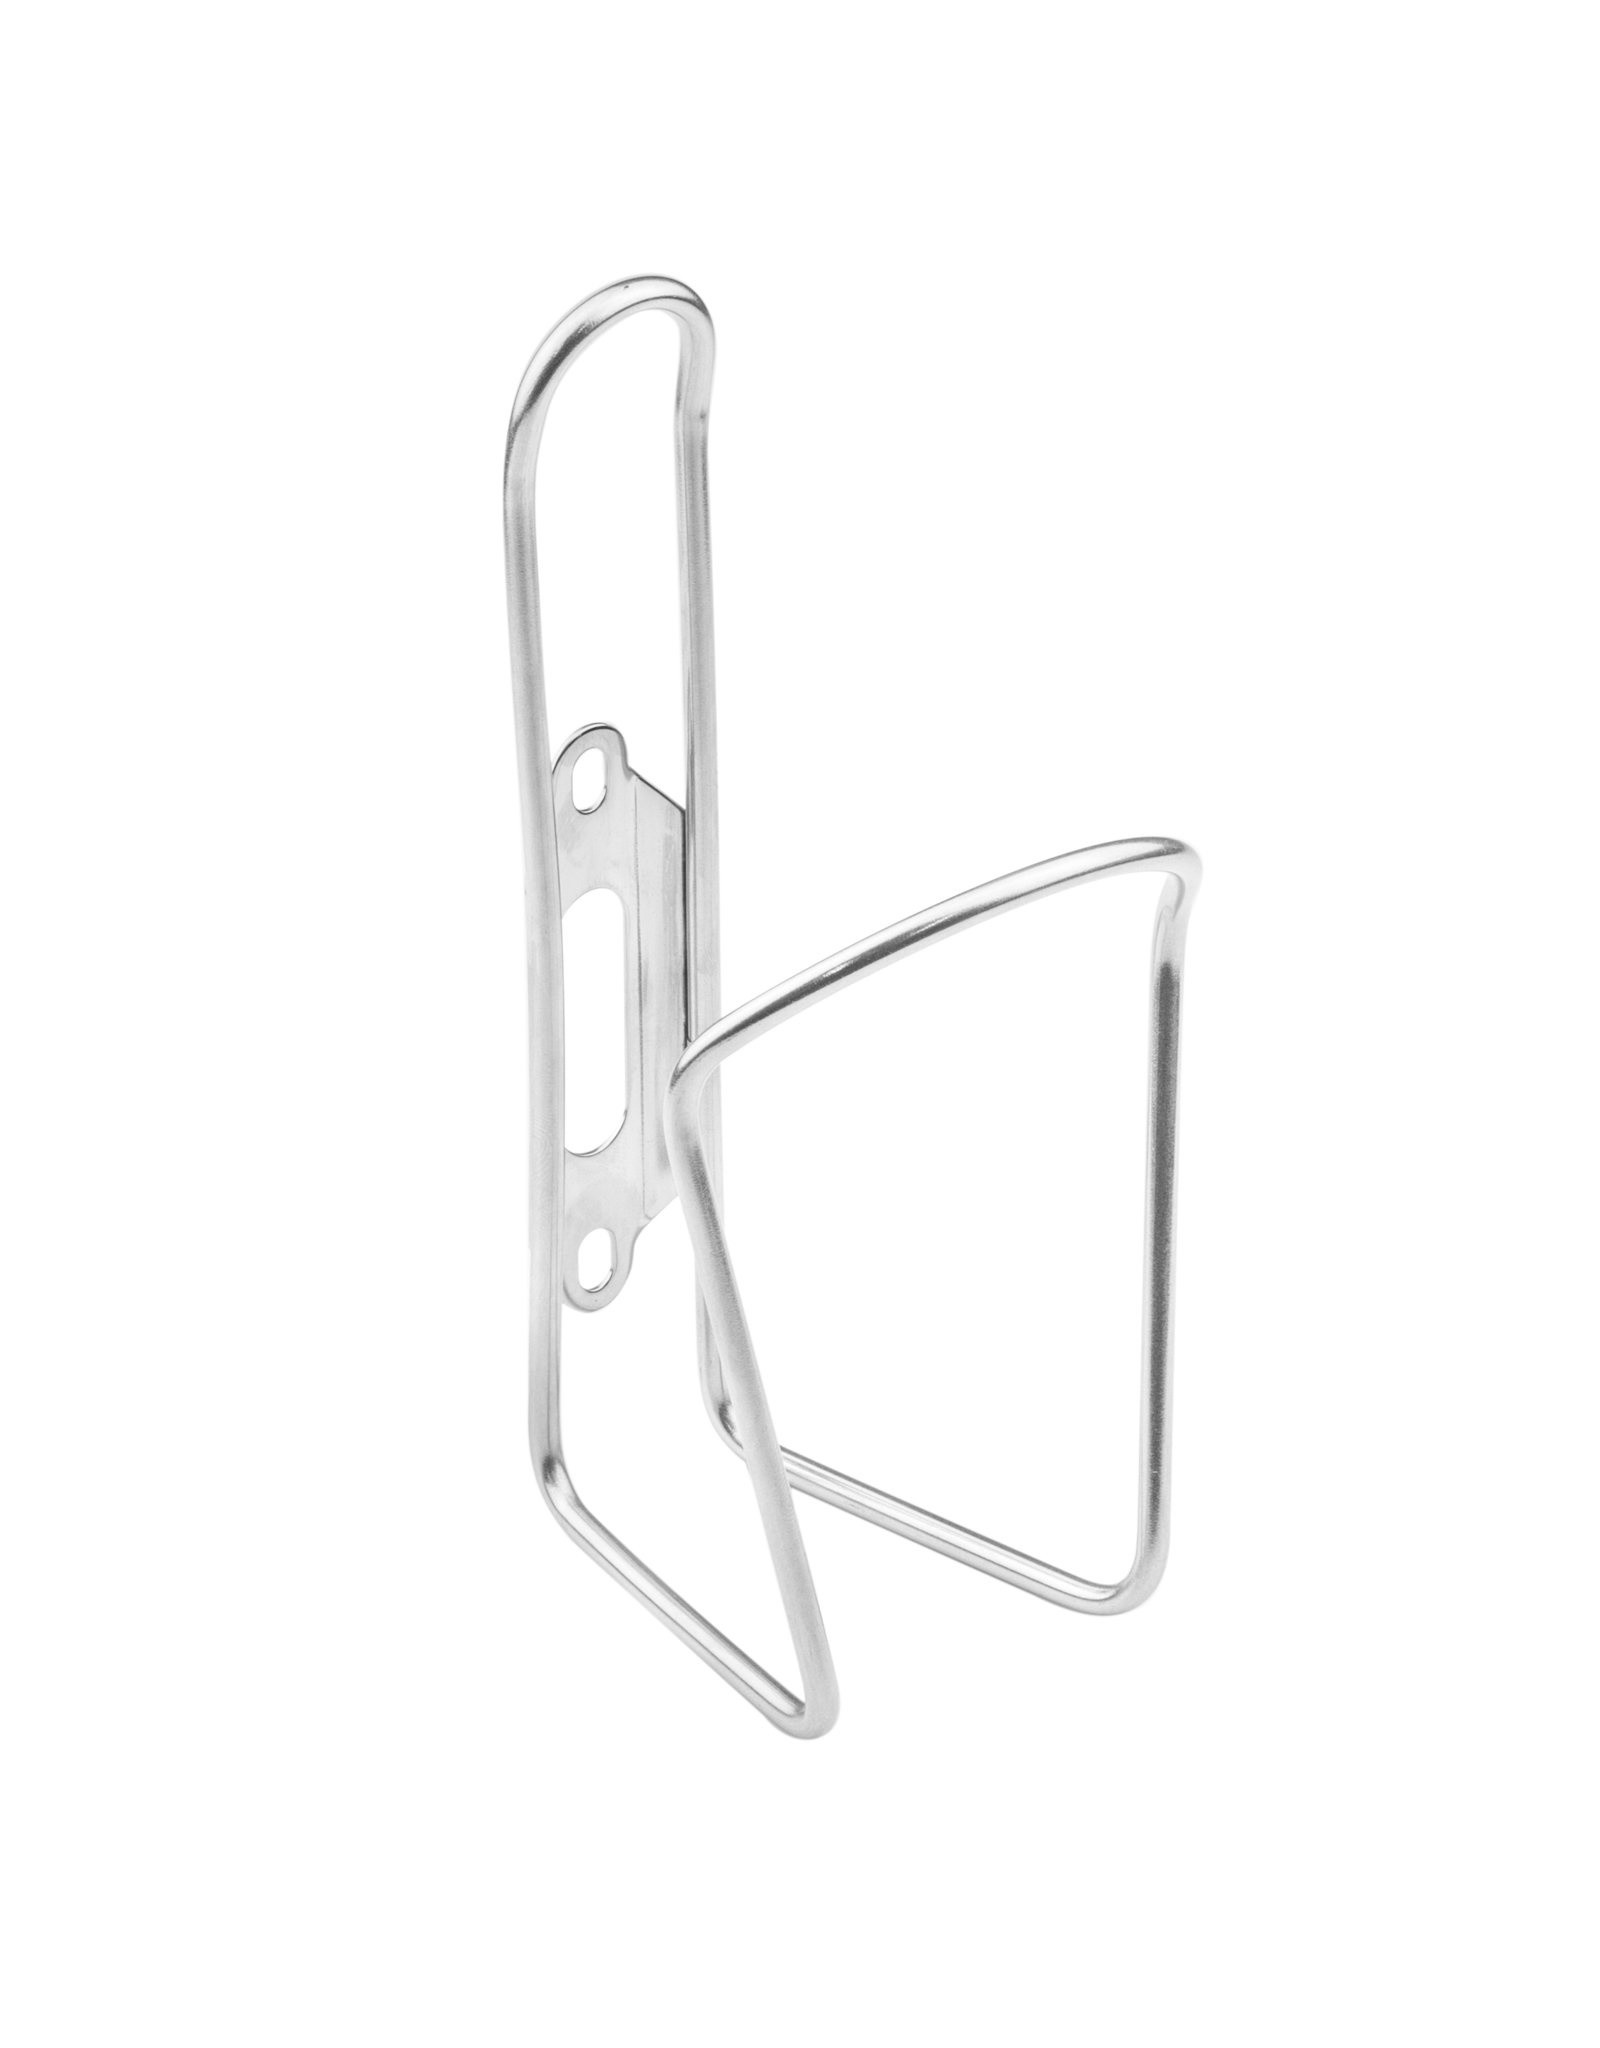 stainless steel bottle cage